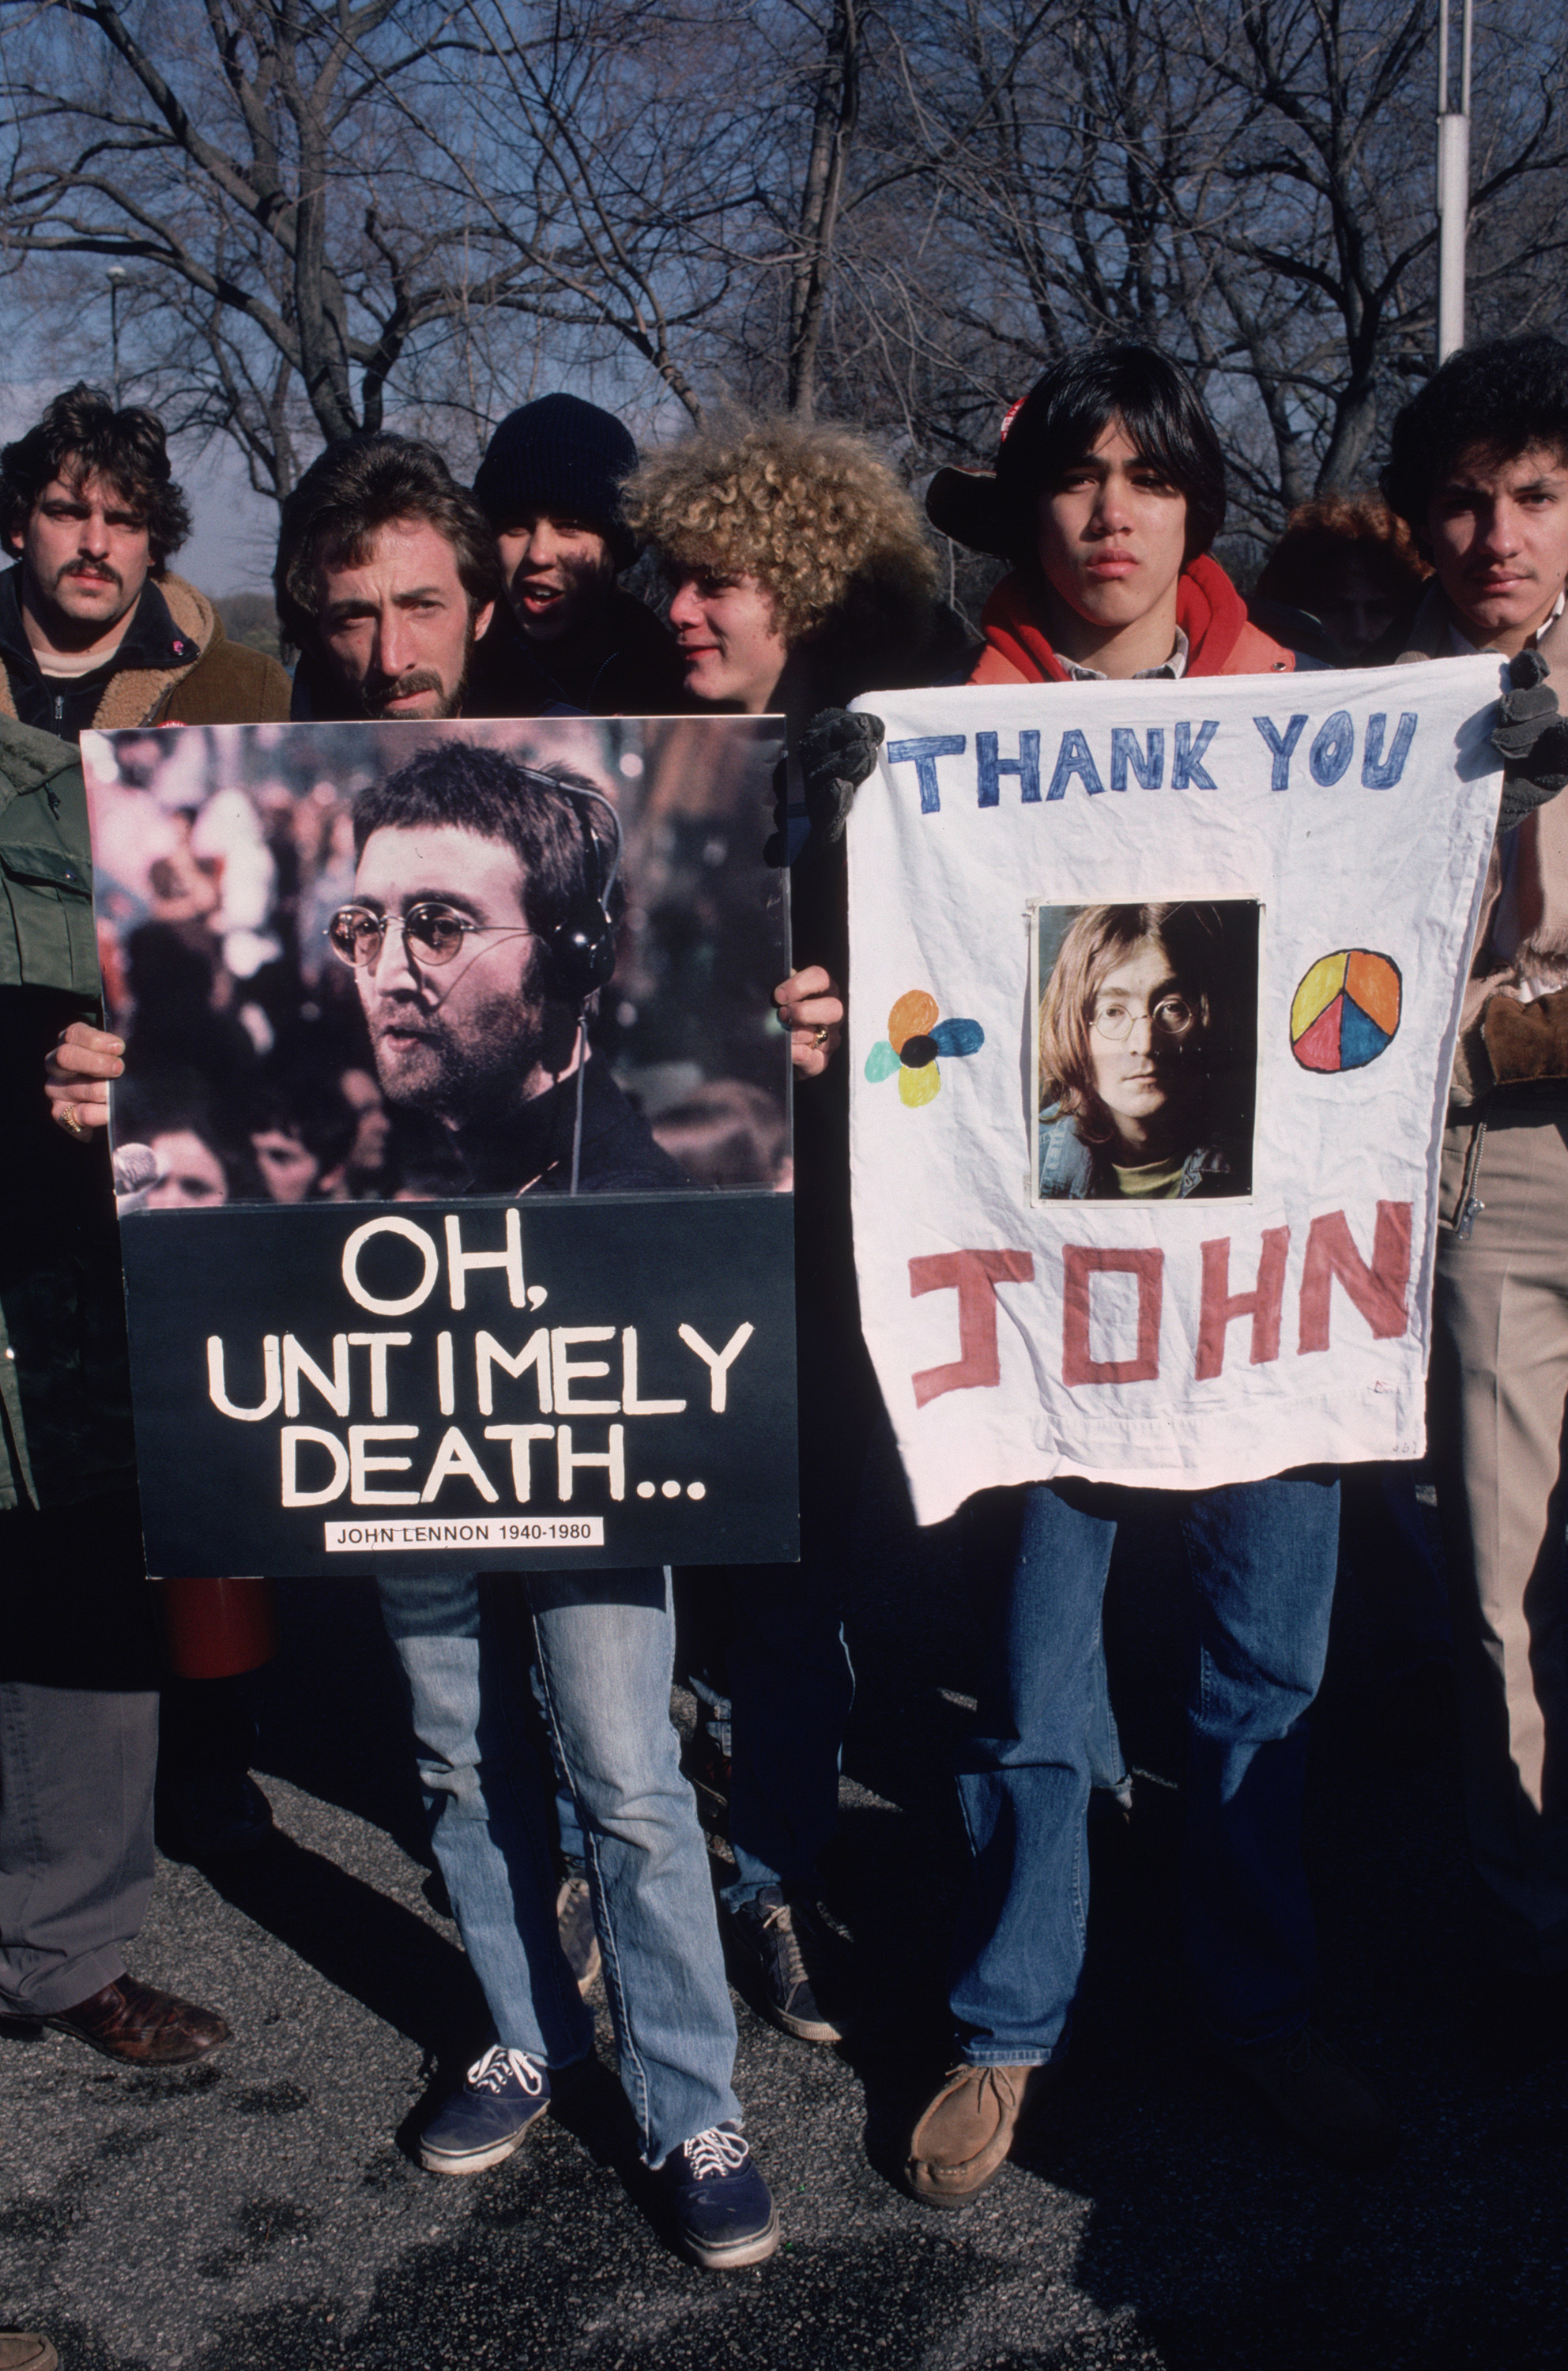 People in a crowd holding signs that say oh untimely death and thank you john after the death of john lennon